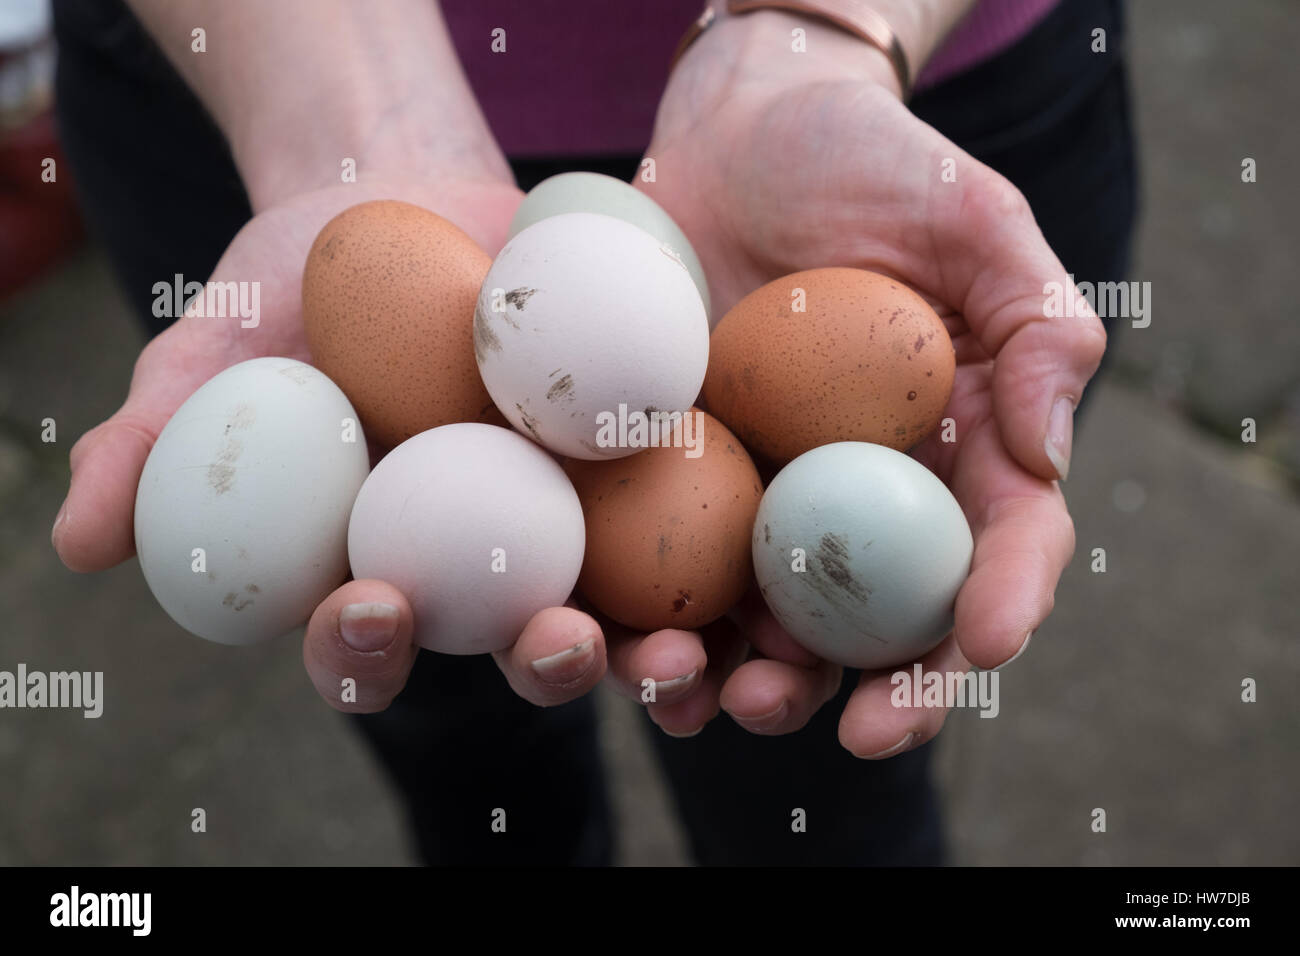 Hands holding out varied fresh laid eggs Stock Photo